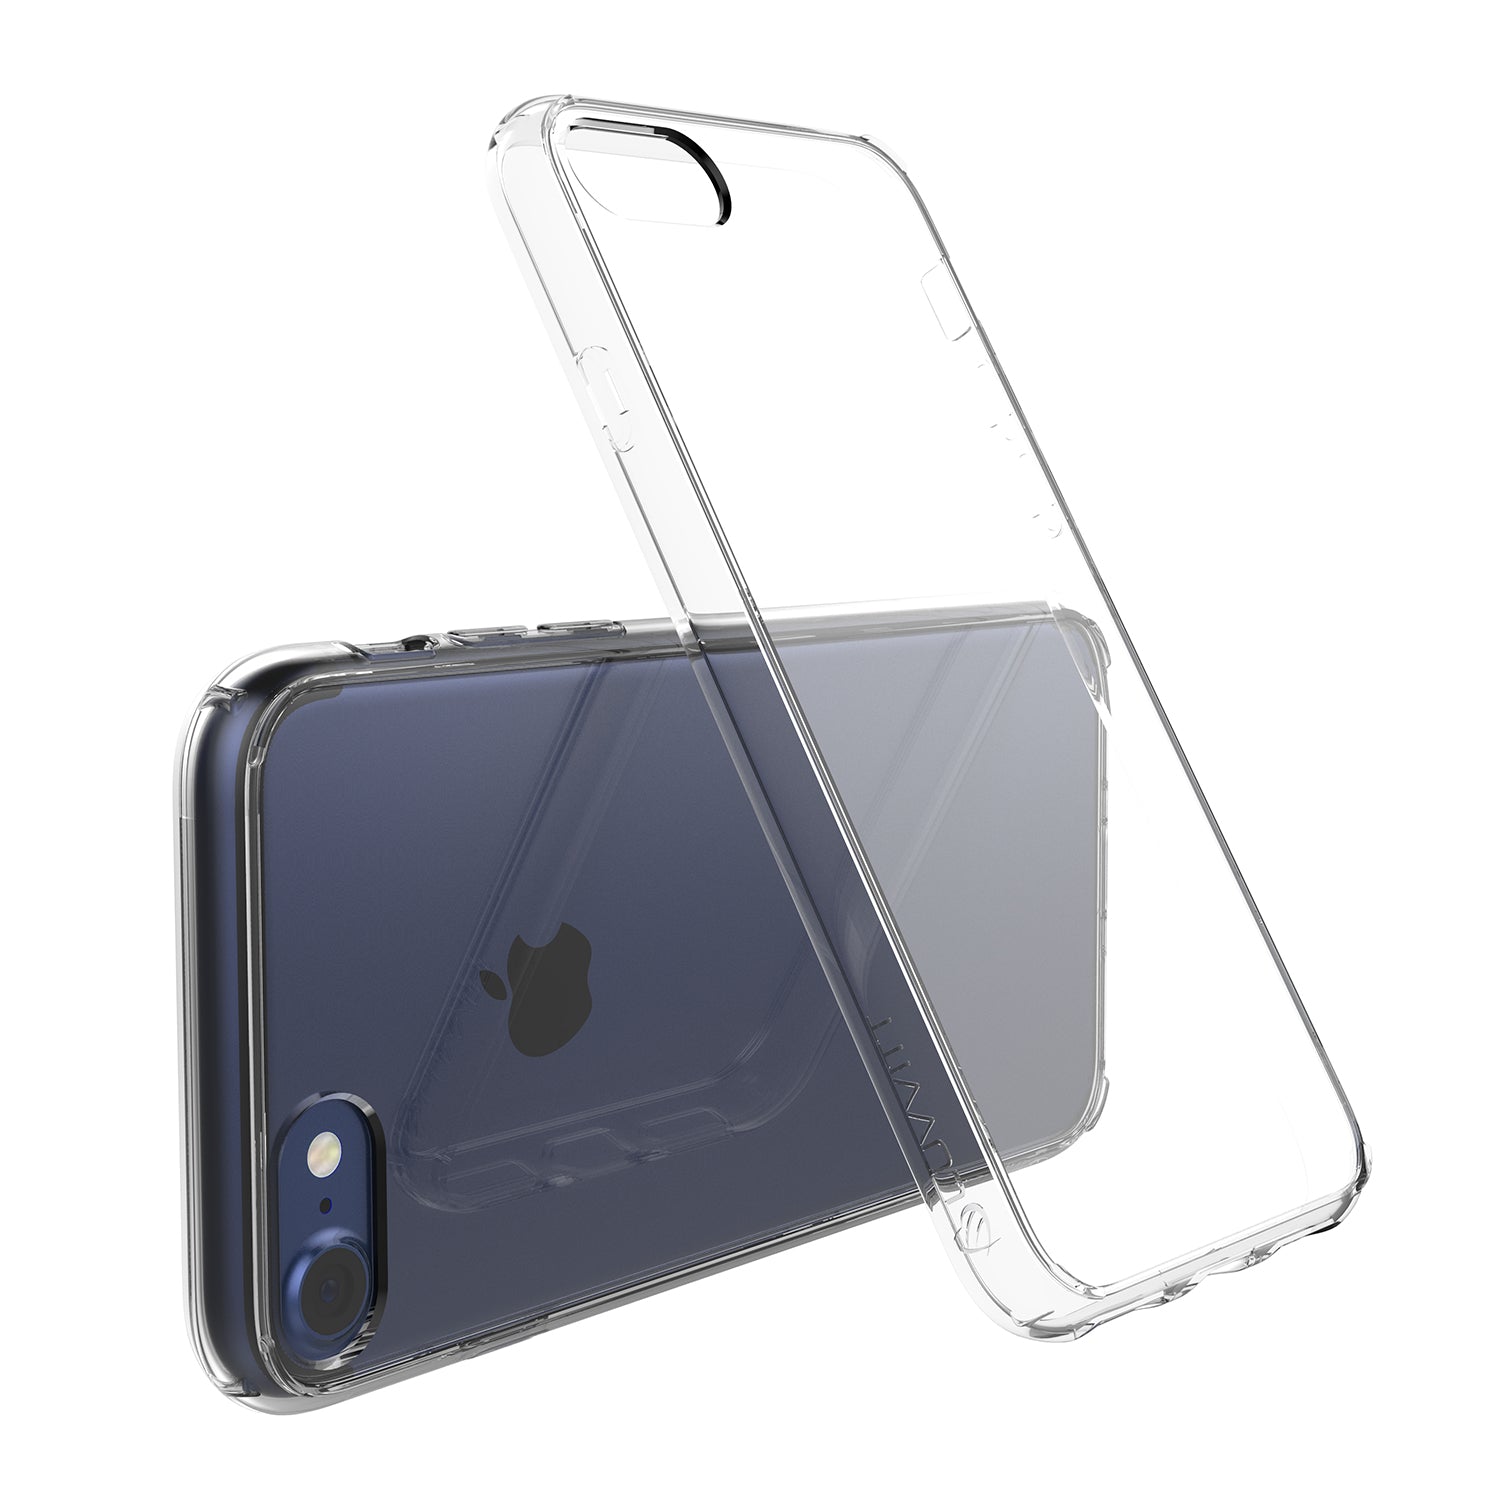 Luvvitt Crystal View Hybrid Case for iPhone 7 and 8 - Crystal Clear